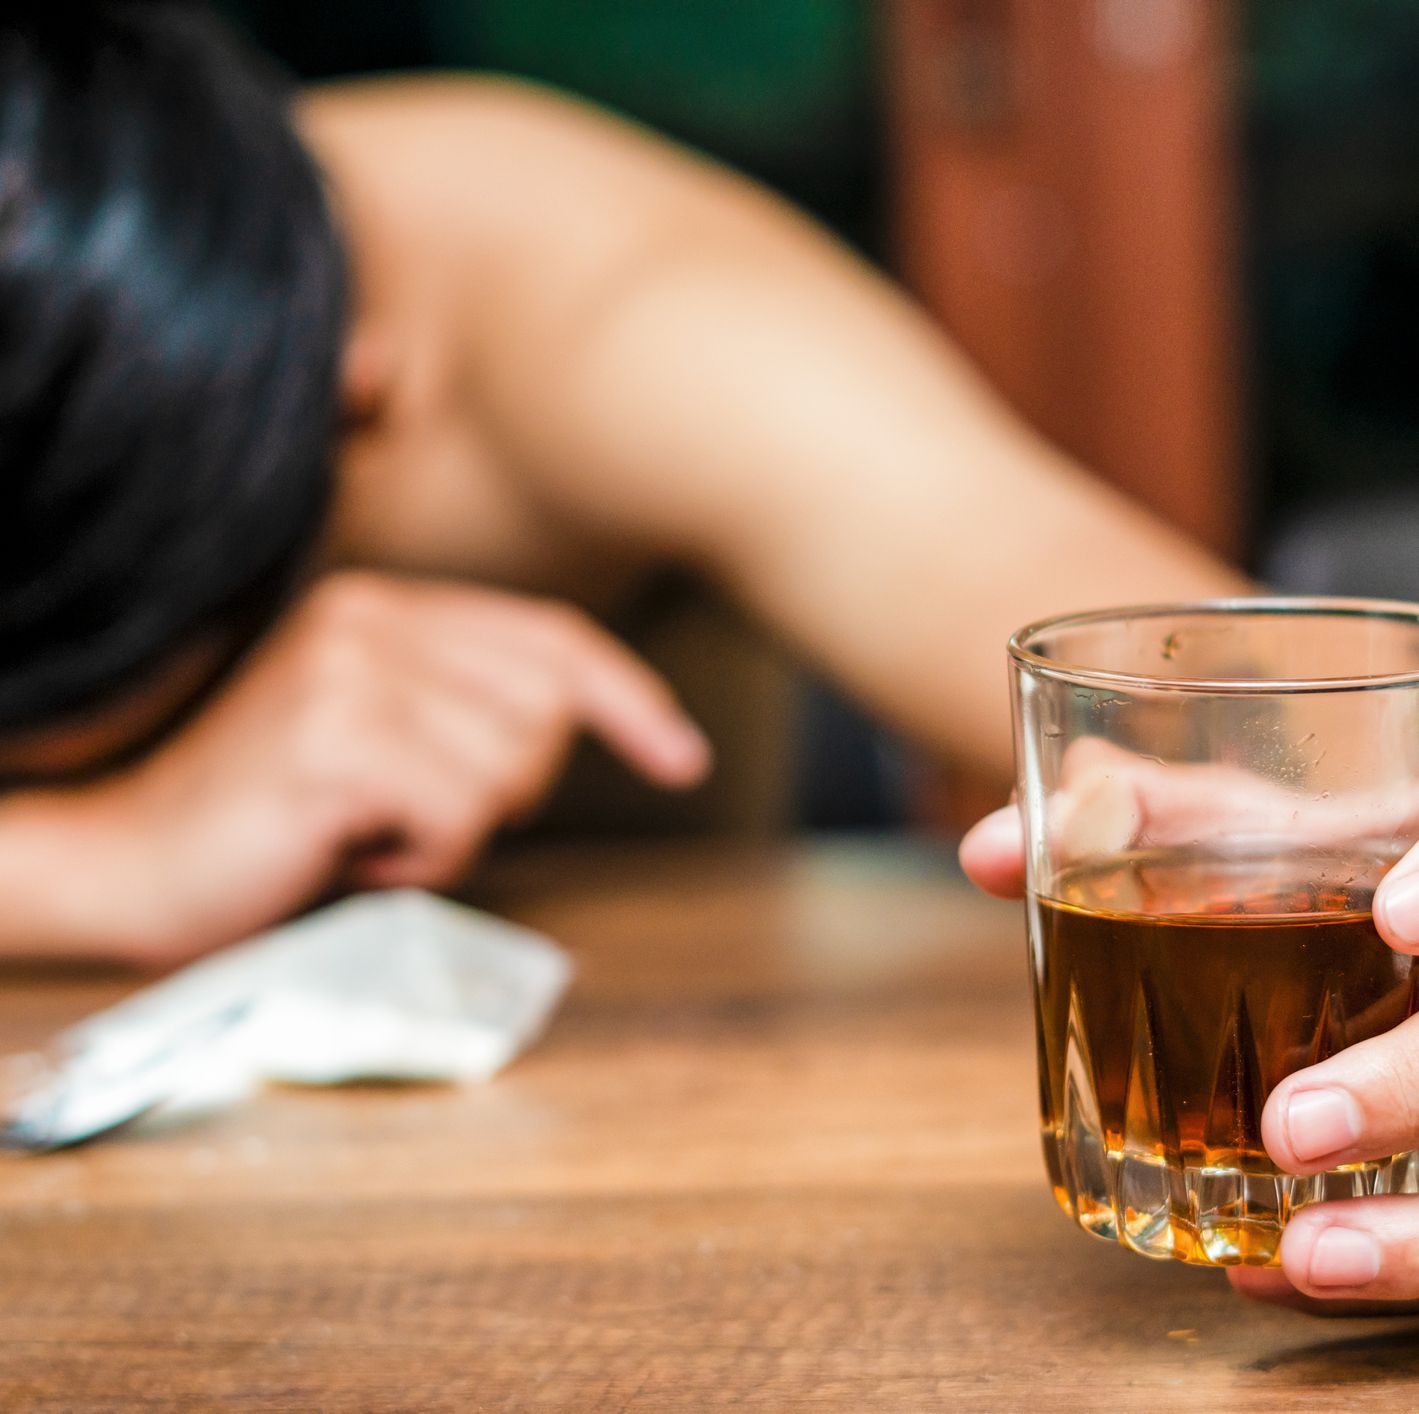 How to Cure a Hangover, According to Science